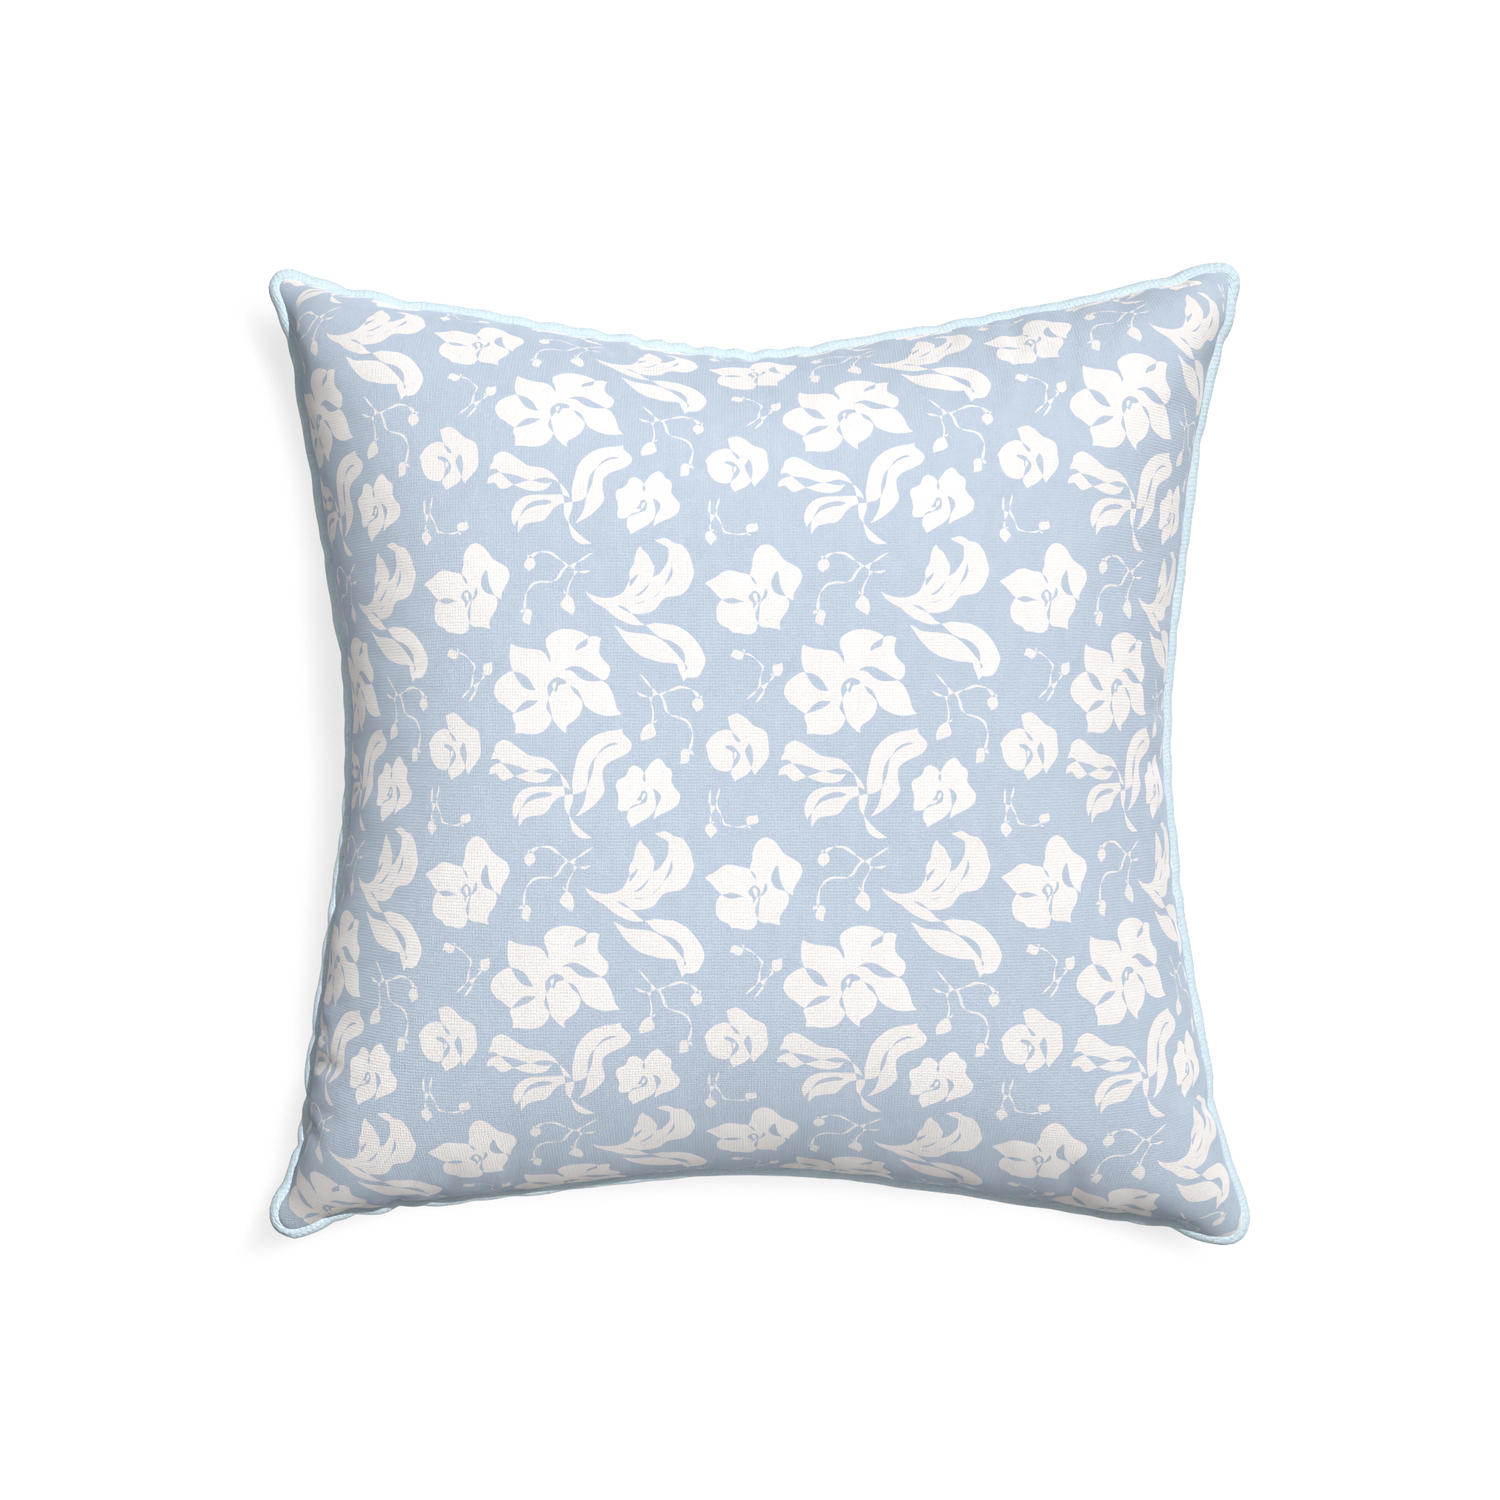 22-square georgia custom pillow with powder piping on white background